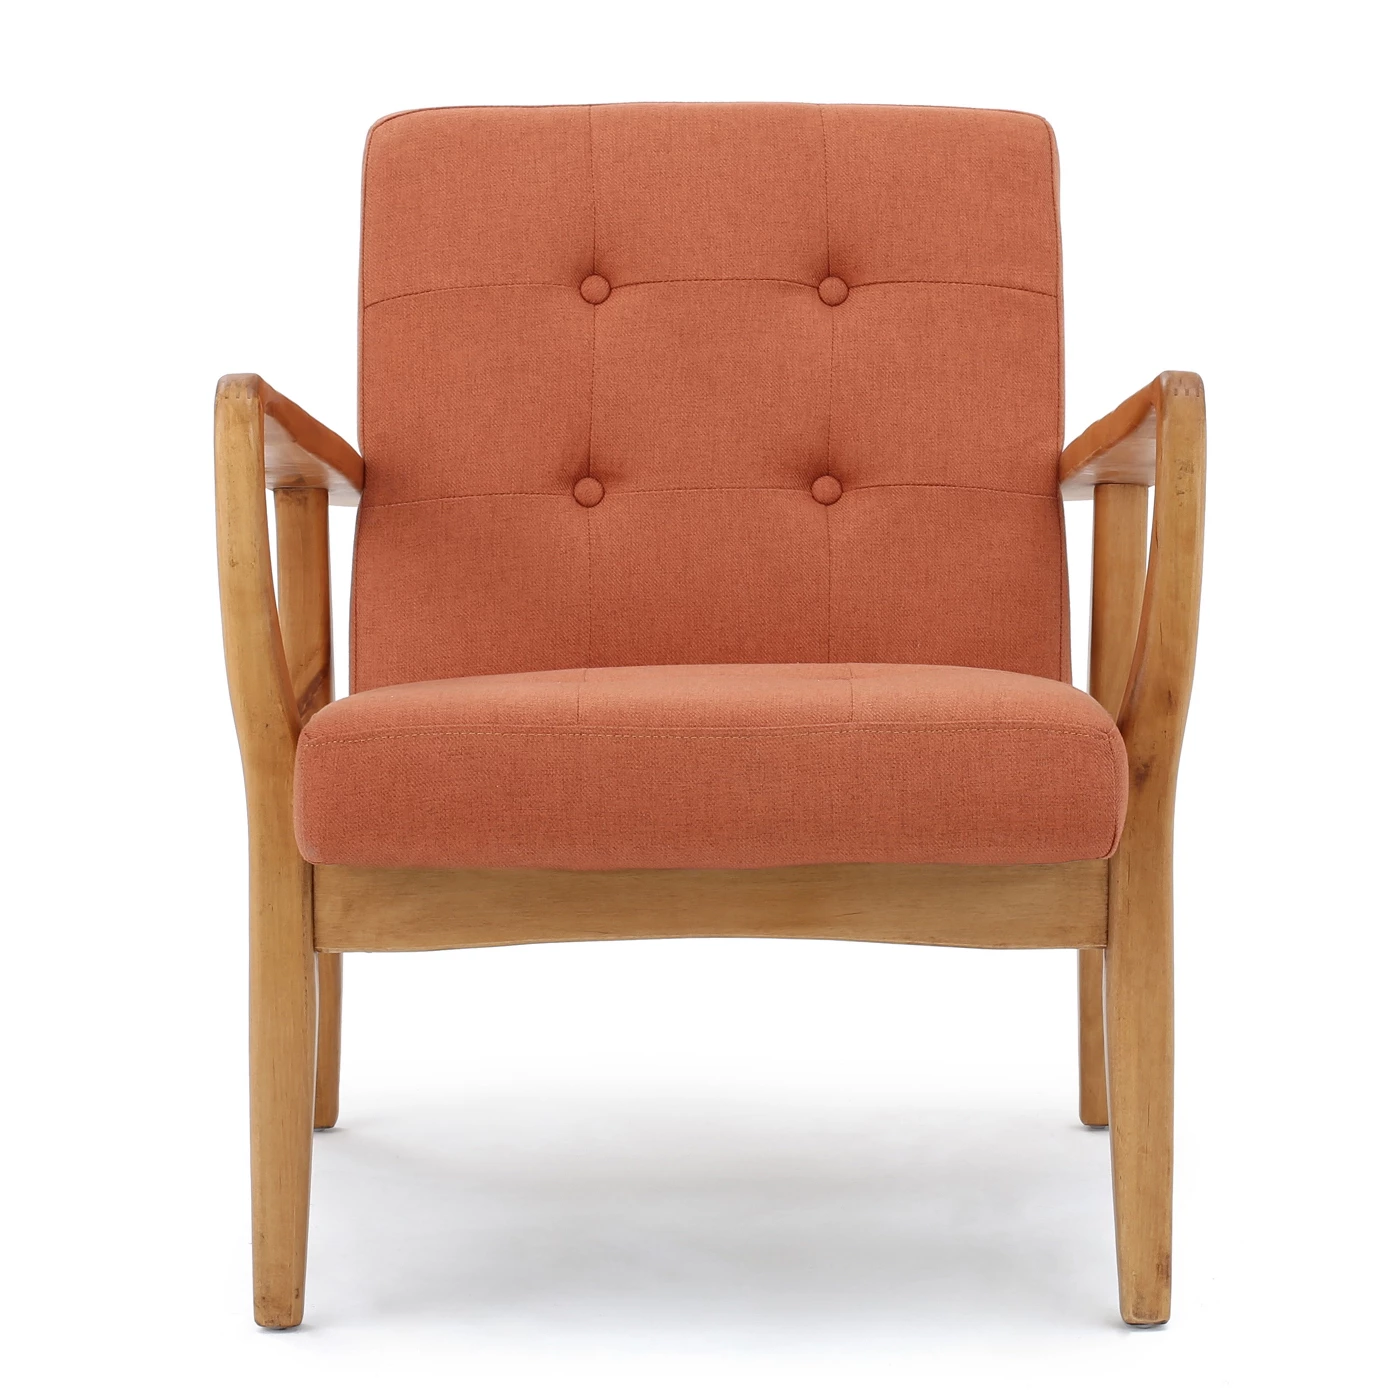 Brayden Tufted Club Chair - Christopher Knight Home - image 1 of 4